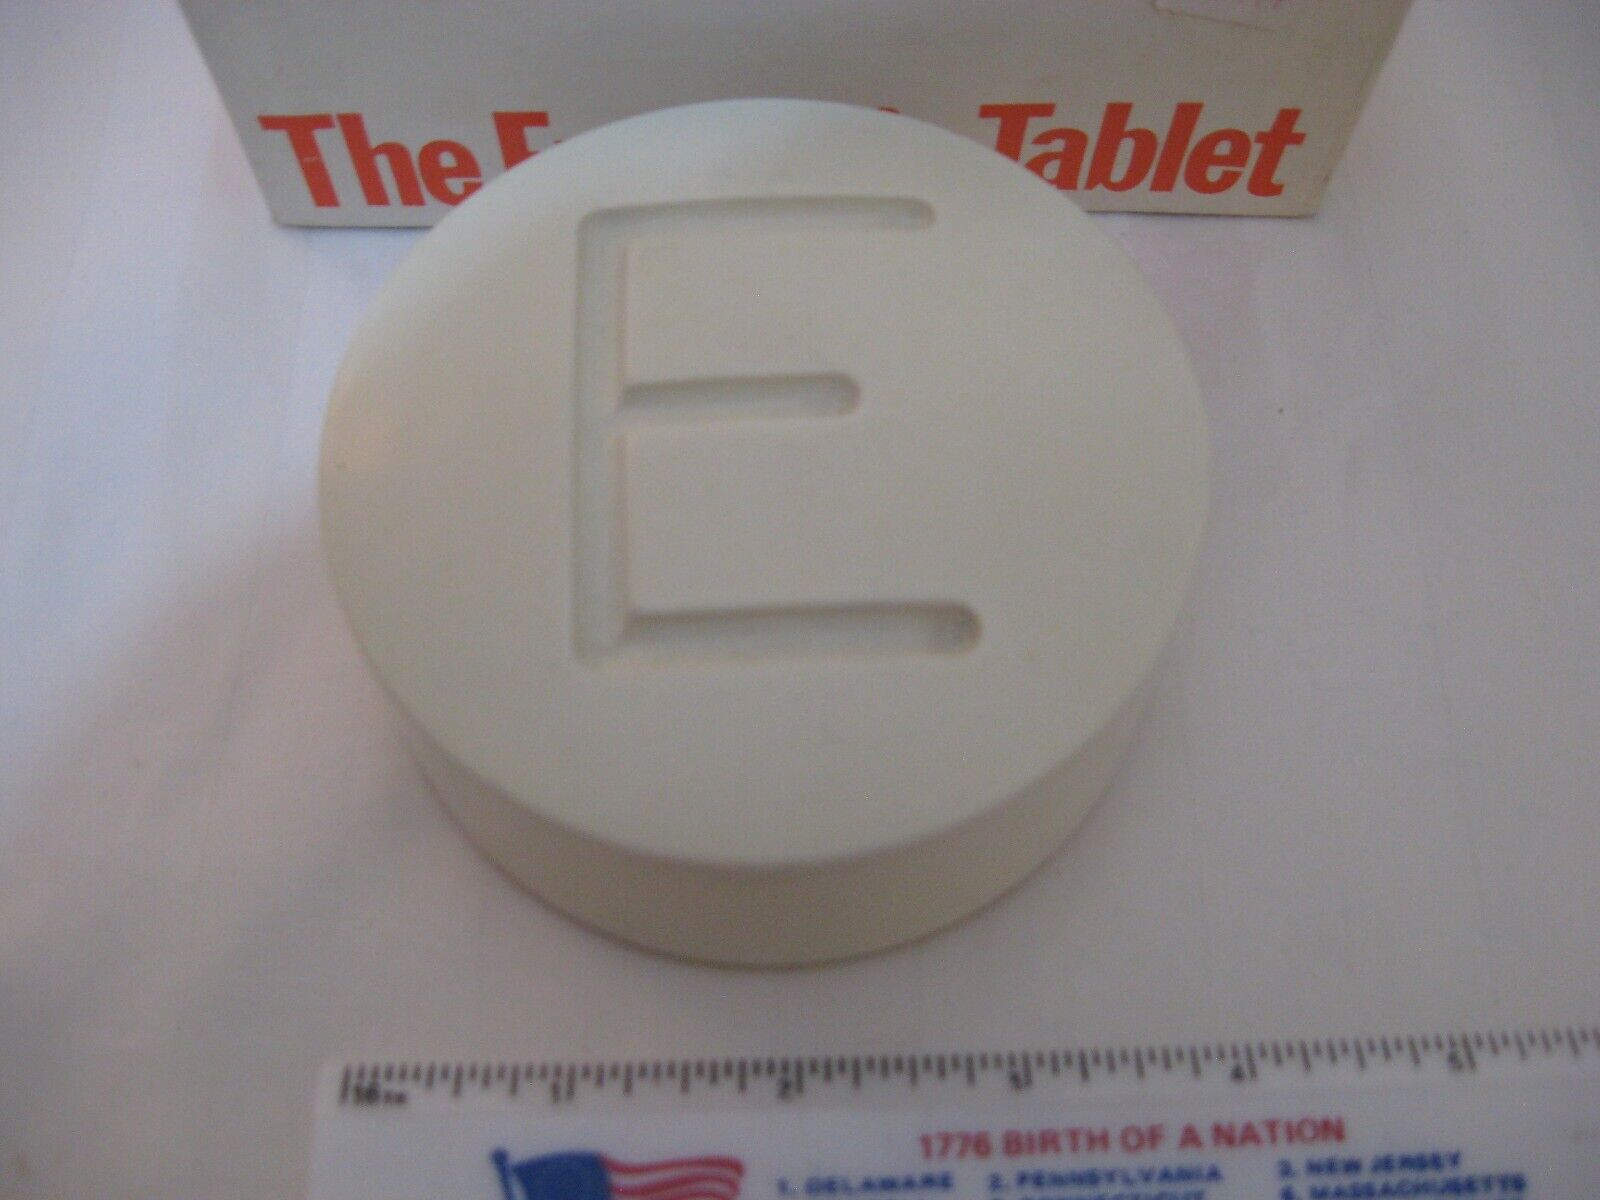 VTG (VeryRare) Giant Excedrin Pill Medicine Paperweight Pharmacy DISPLAY 3-3/4”